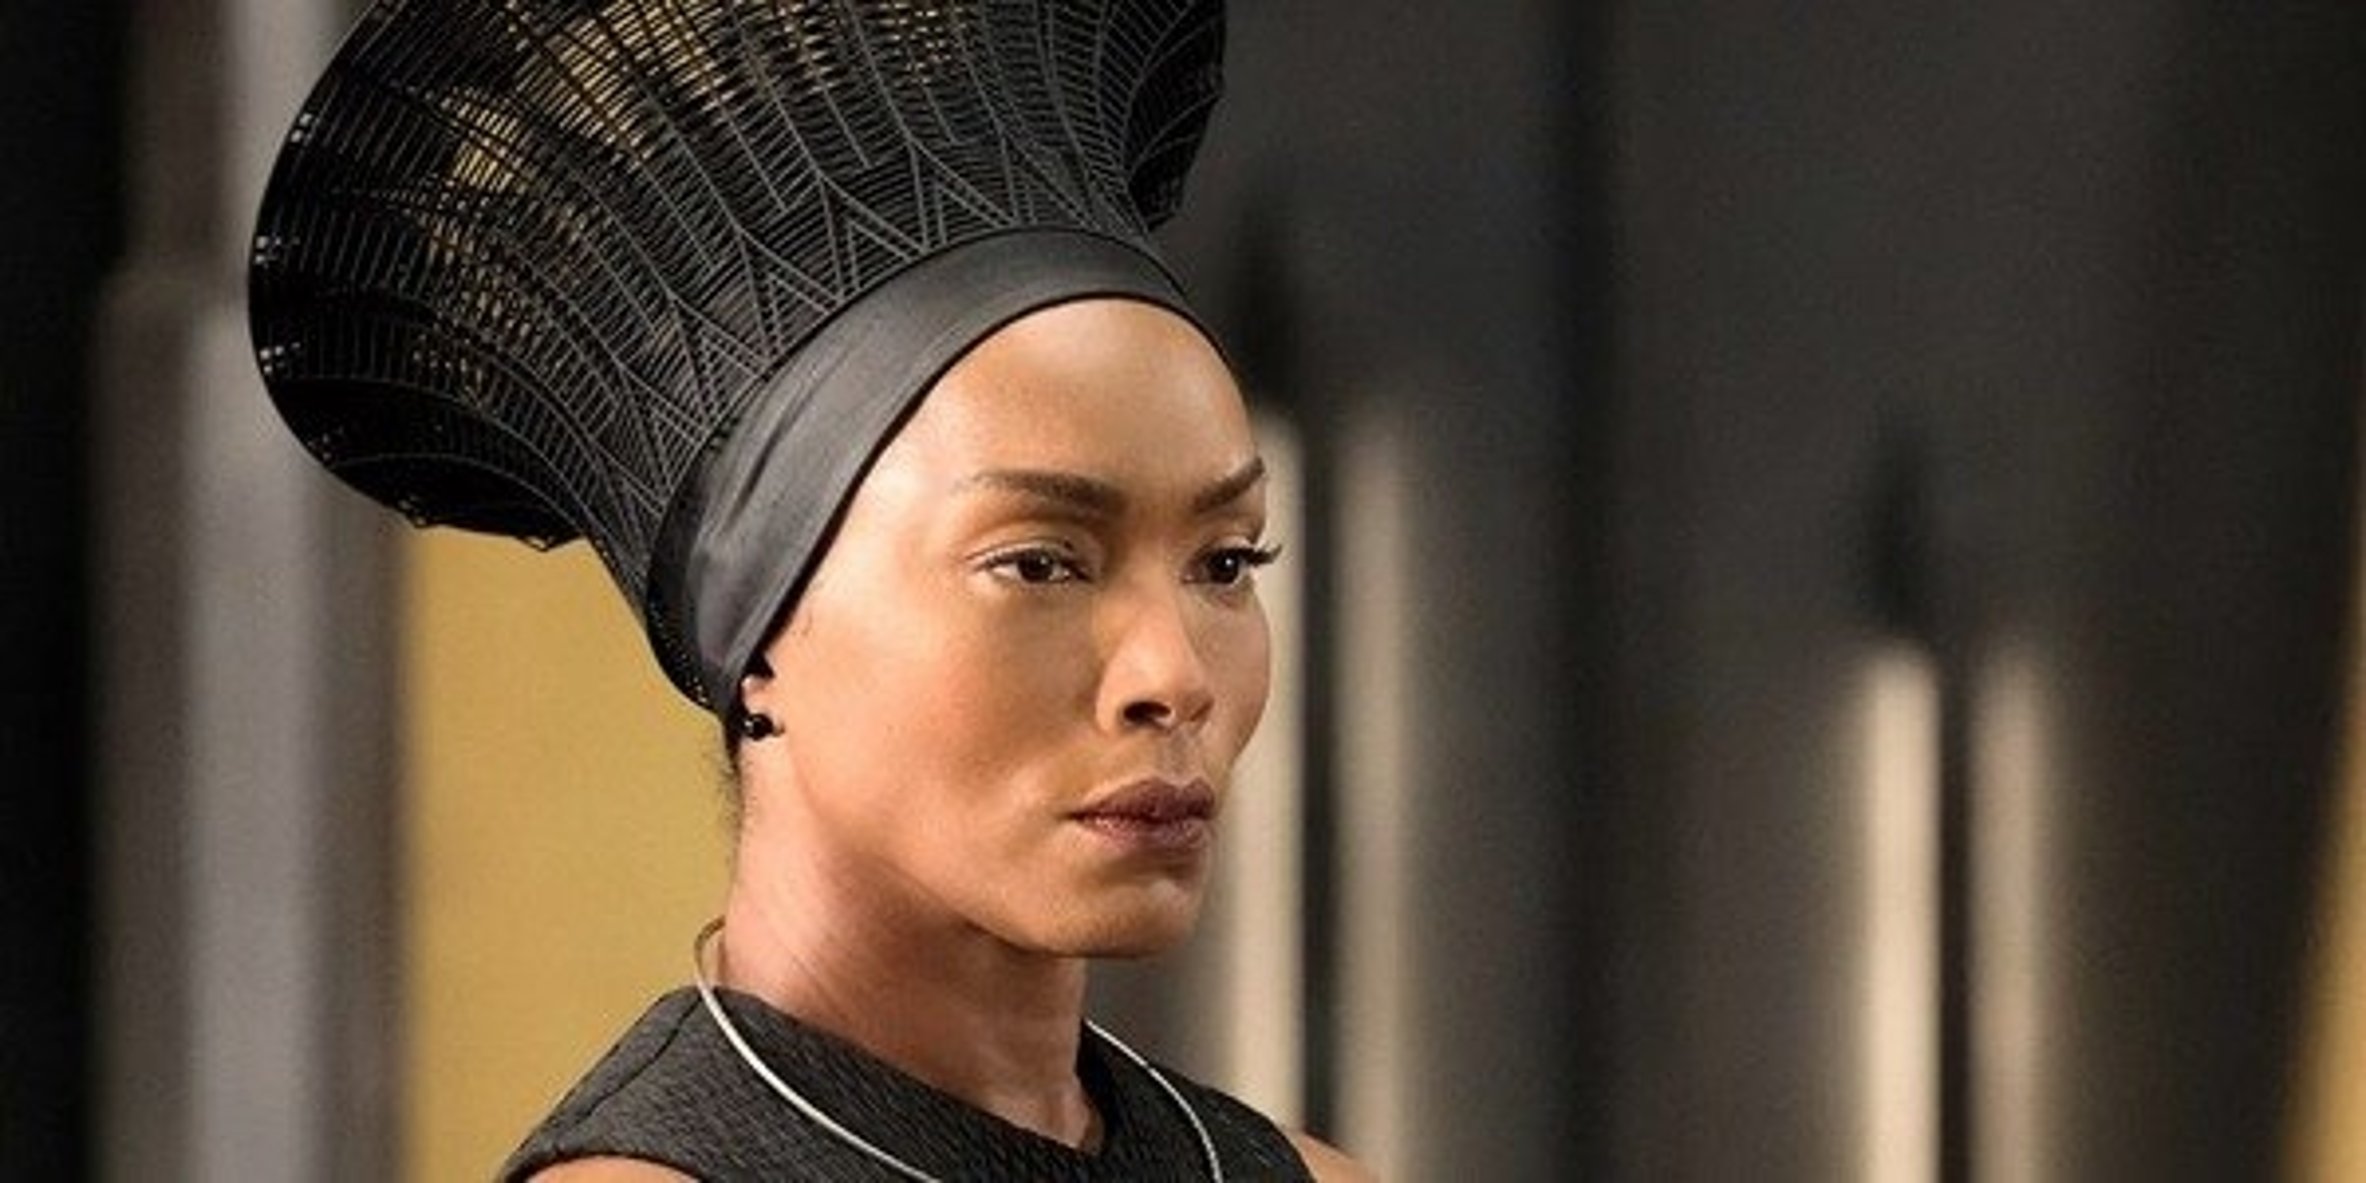 Black Panther Actress Angela Bassett Shares Her Opinion About The Decision Not To Replace Chadwick Boseman in The Sequel